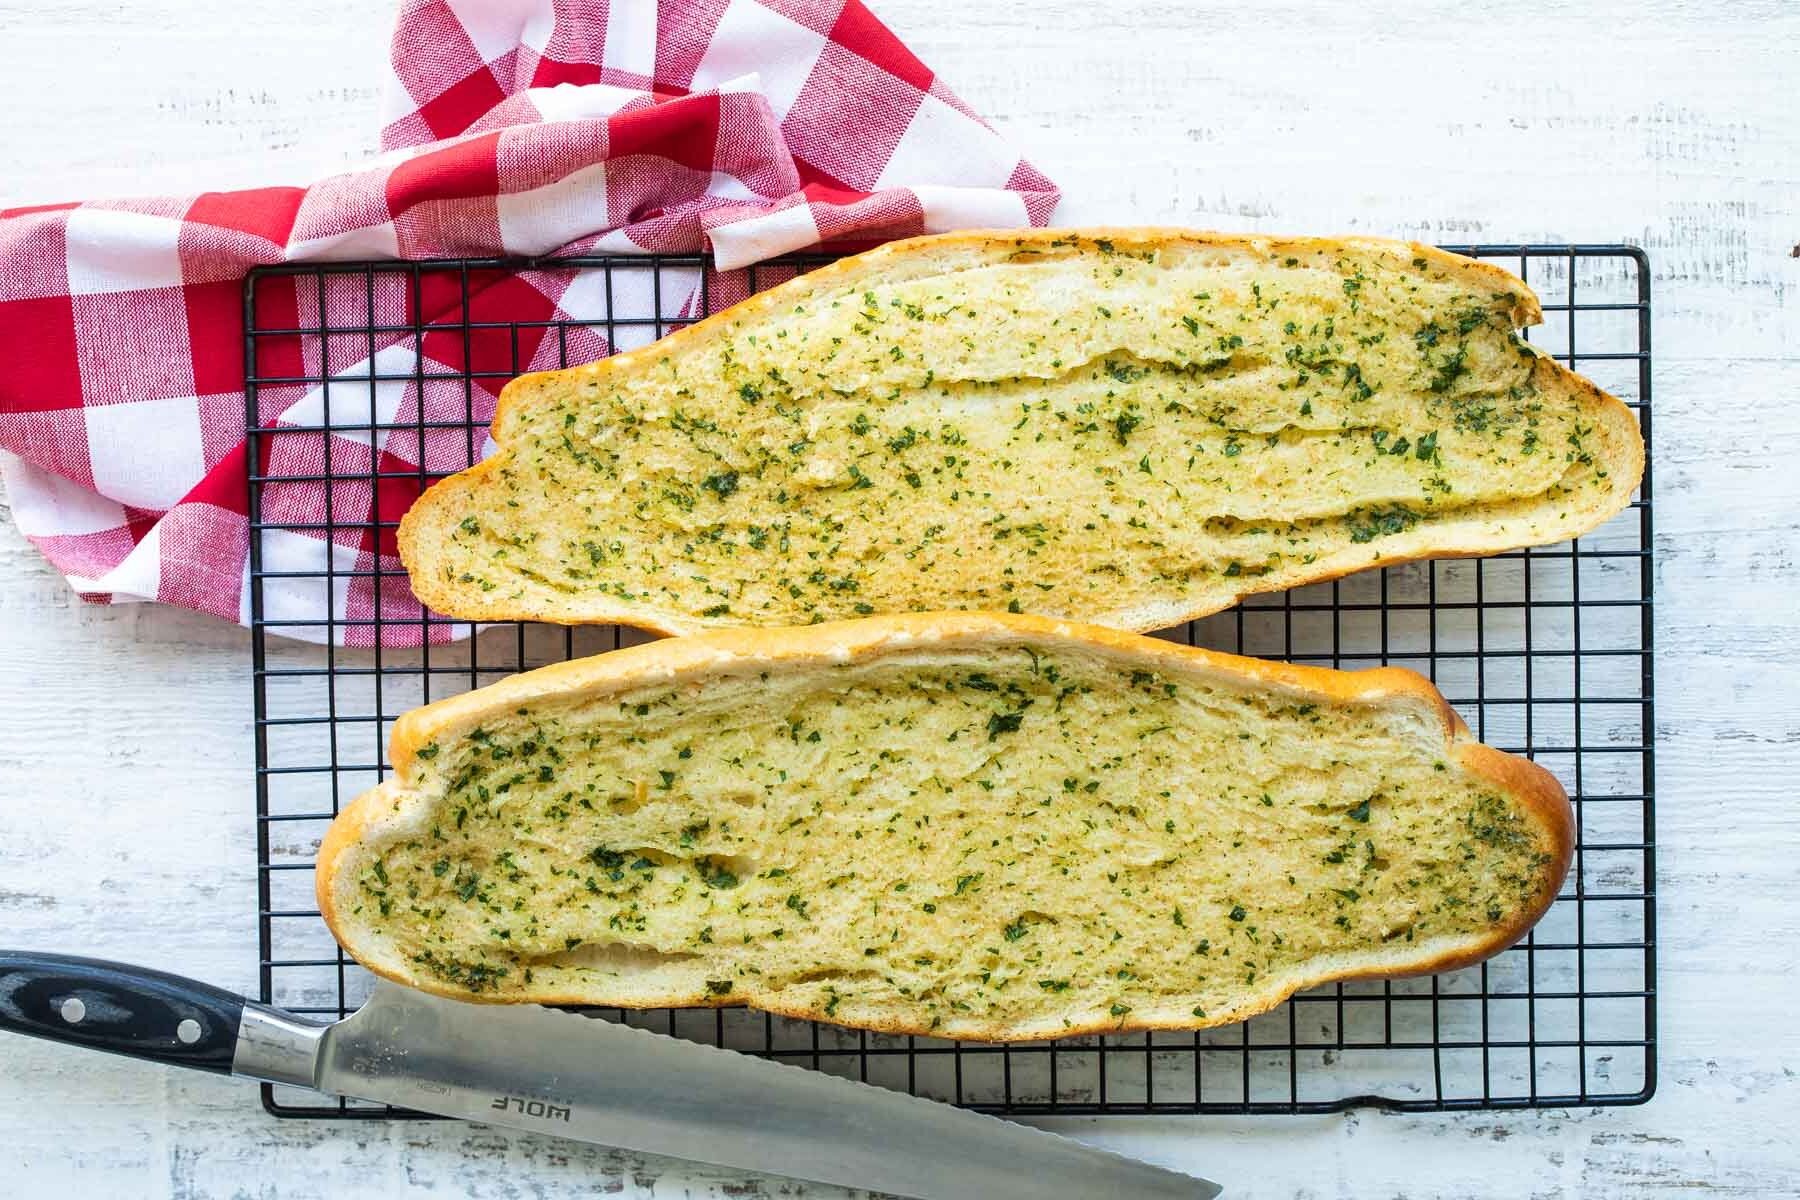 Garlic bread on a cooling rack.